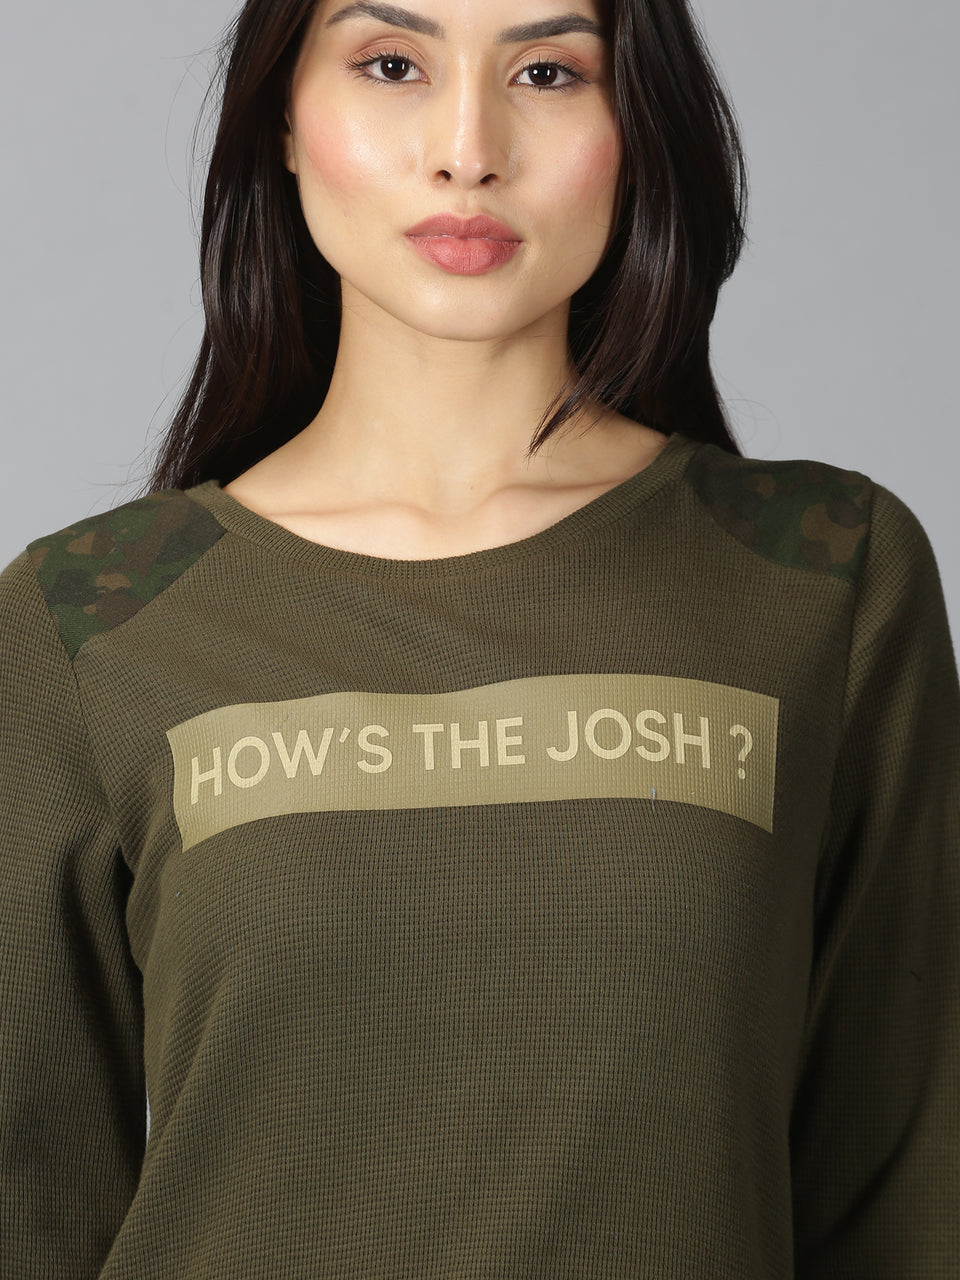 Women Olive Green Typographic Printed Round Neck Casual T-Shirt